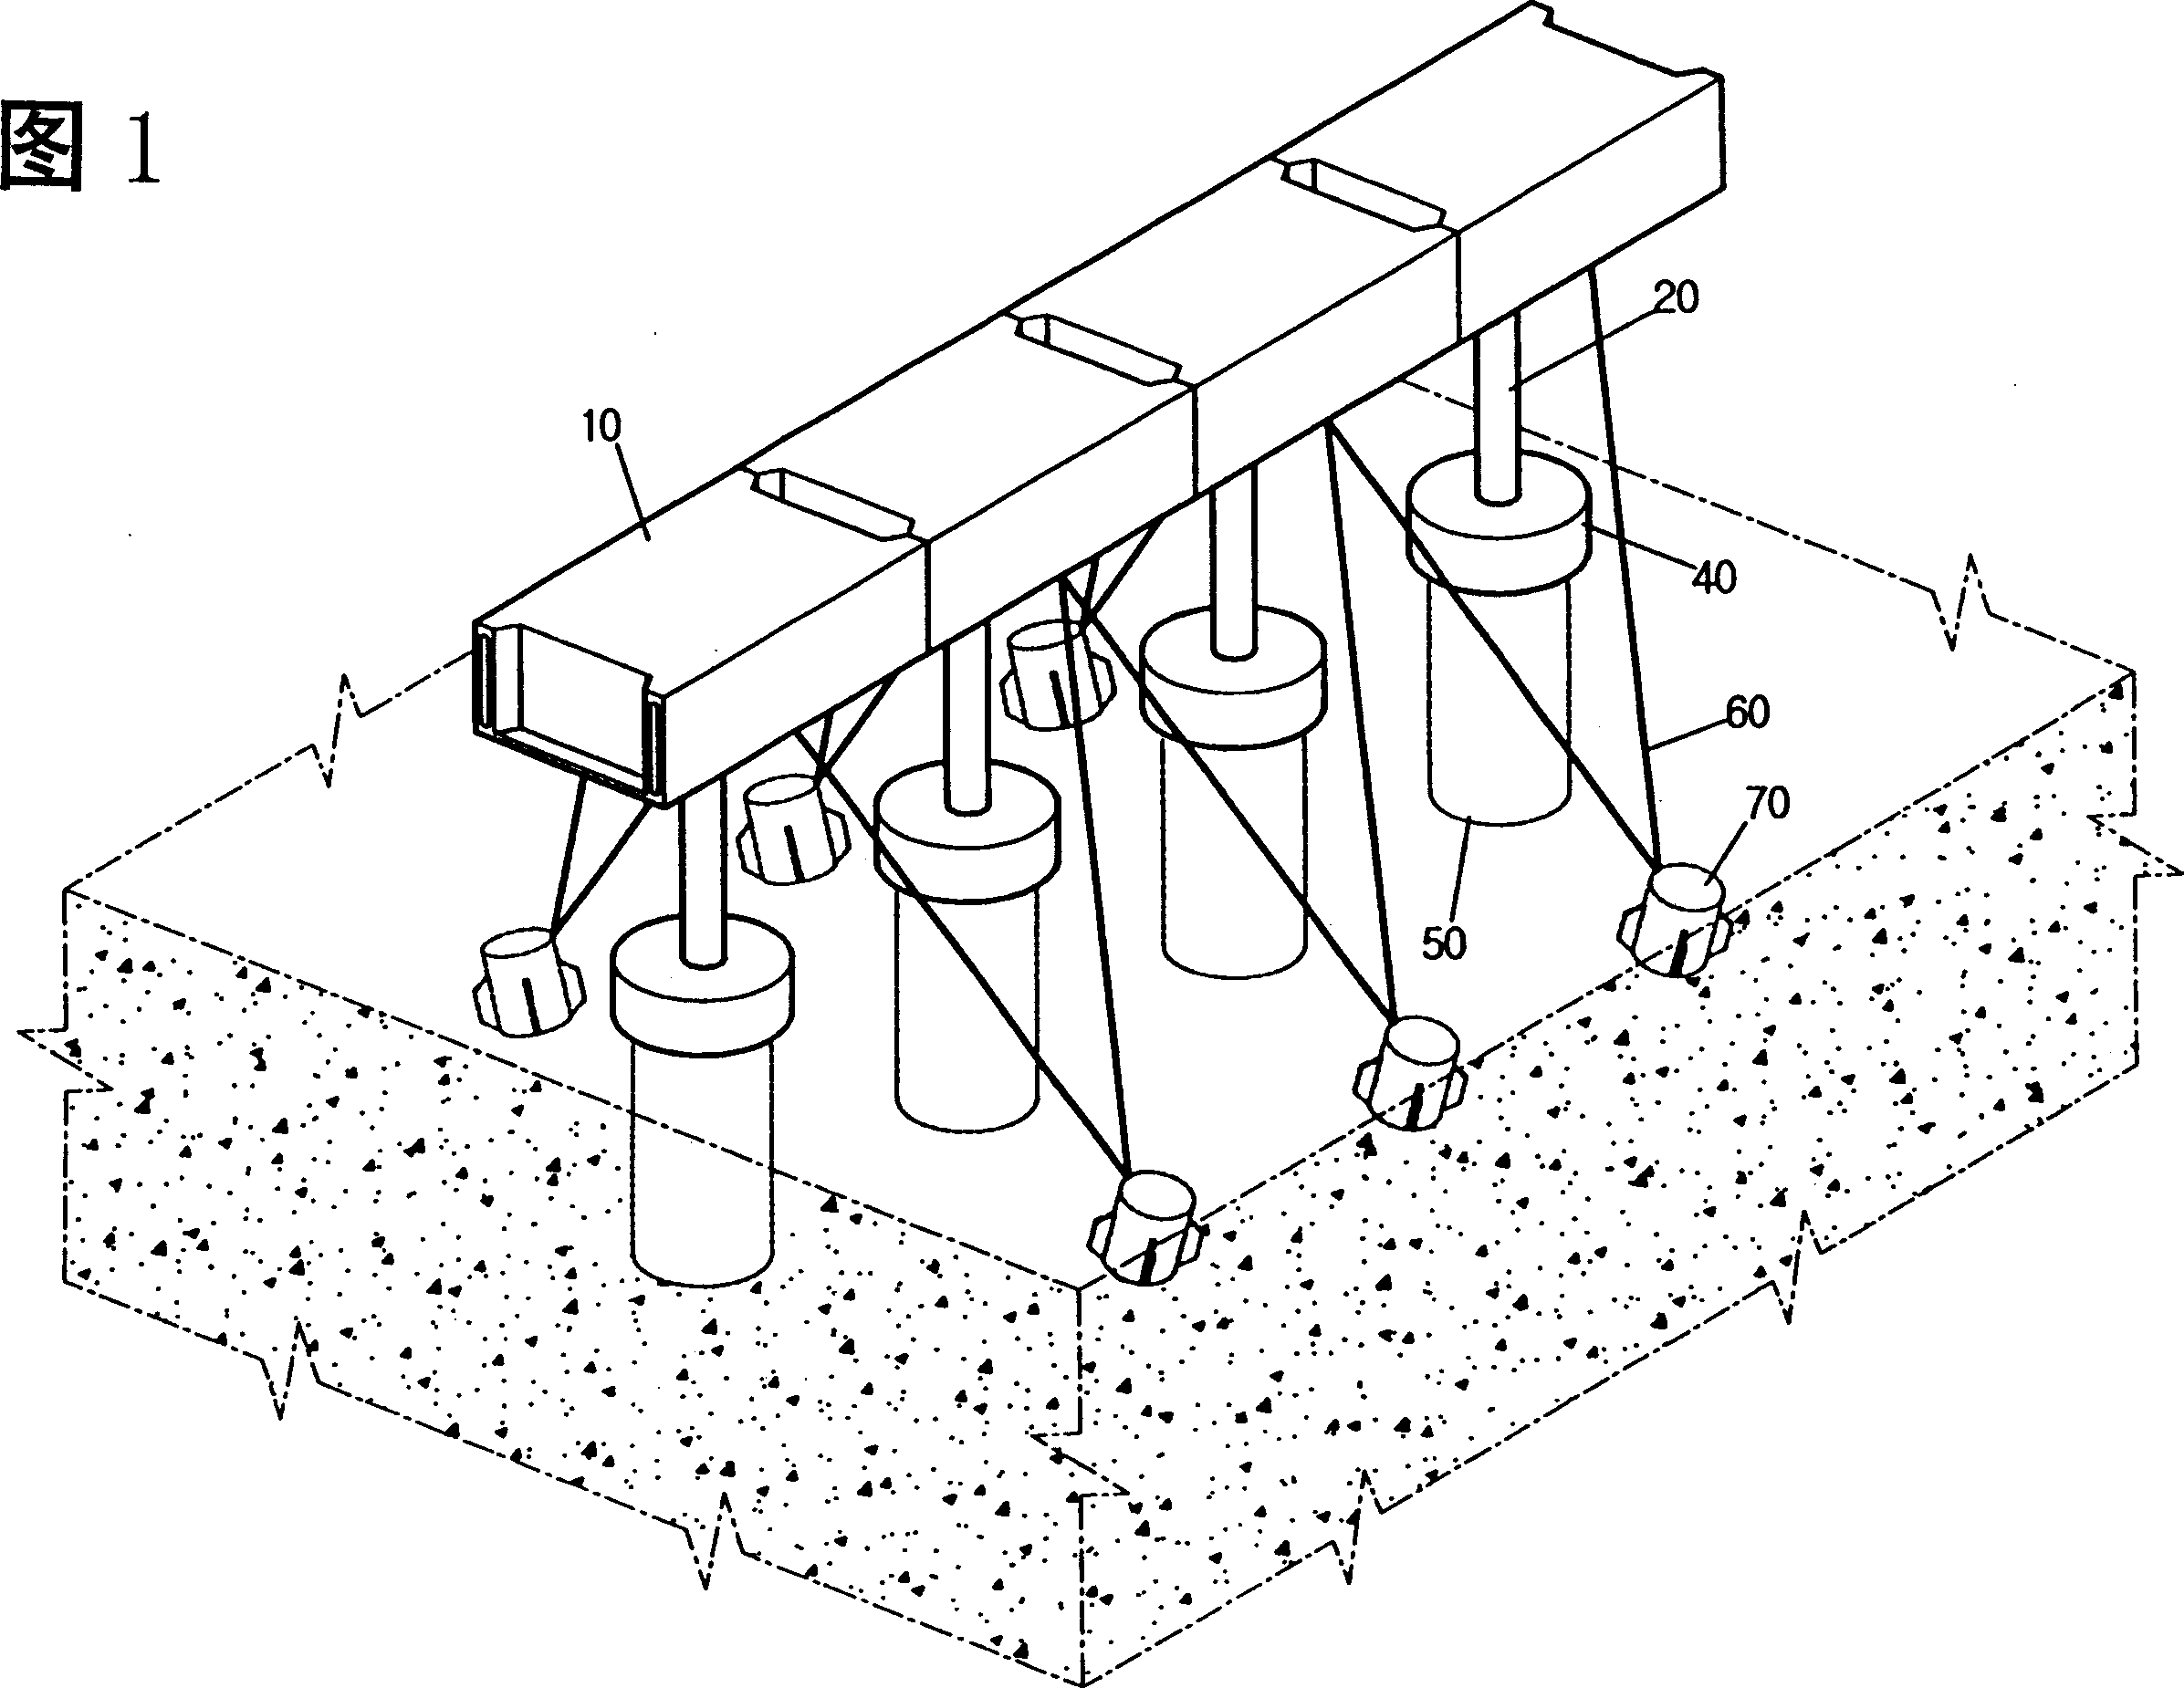 Wave-proof dyke structural object adopting pile foundation